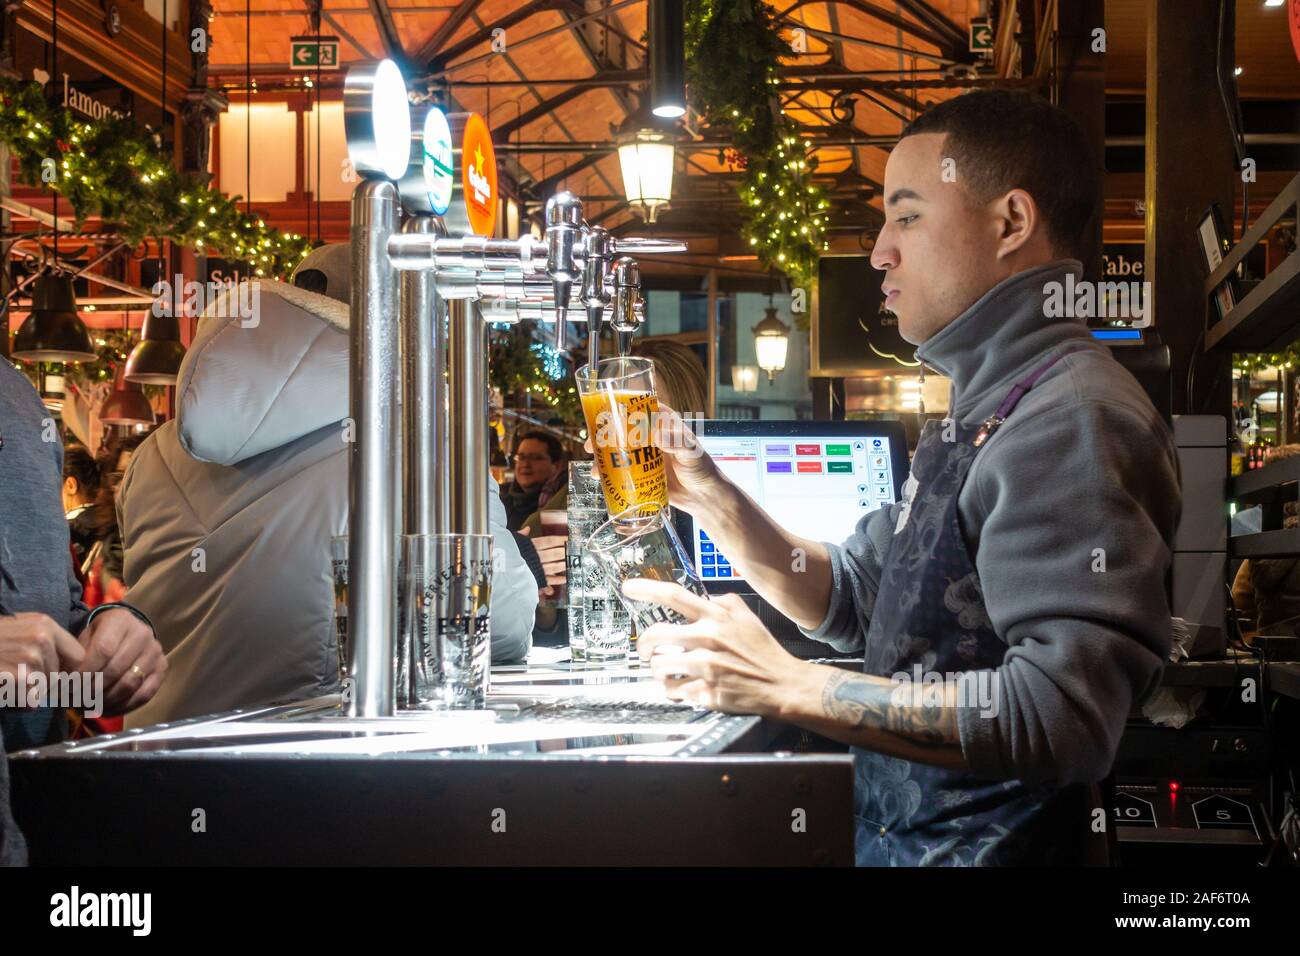 A barman pours a beer for a customer in Mercado San Miguel, an indoor market in Madrid, Spain, seen here on the evening close to Christmas. Stock Photo